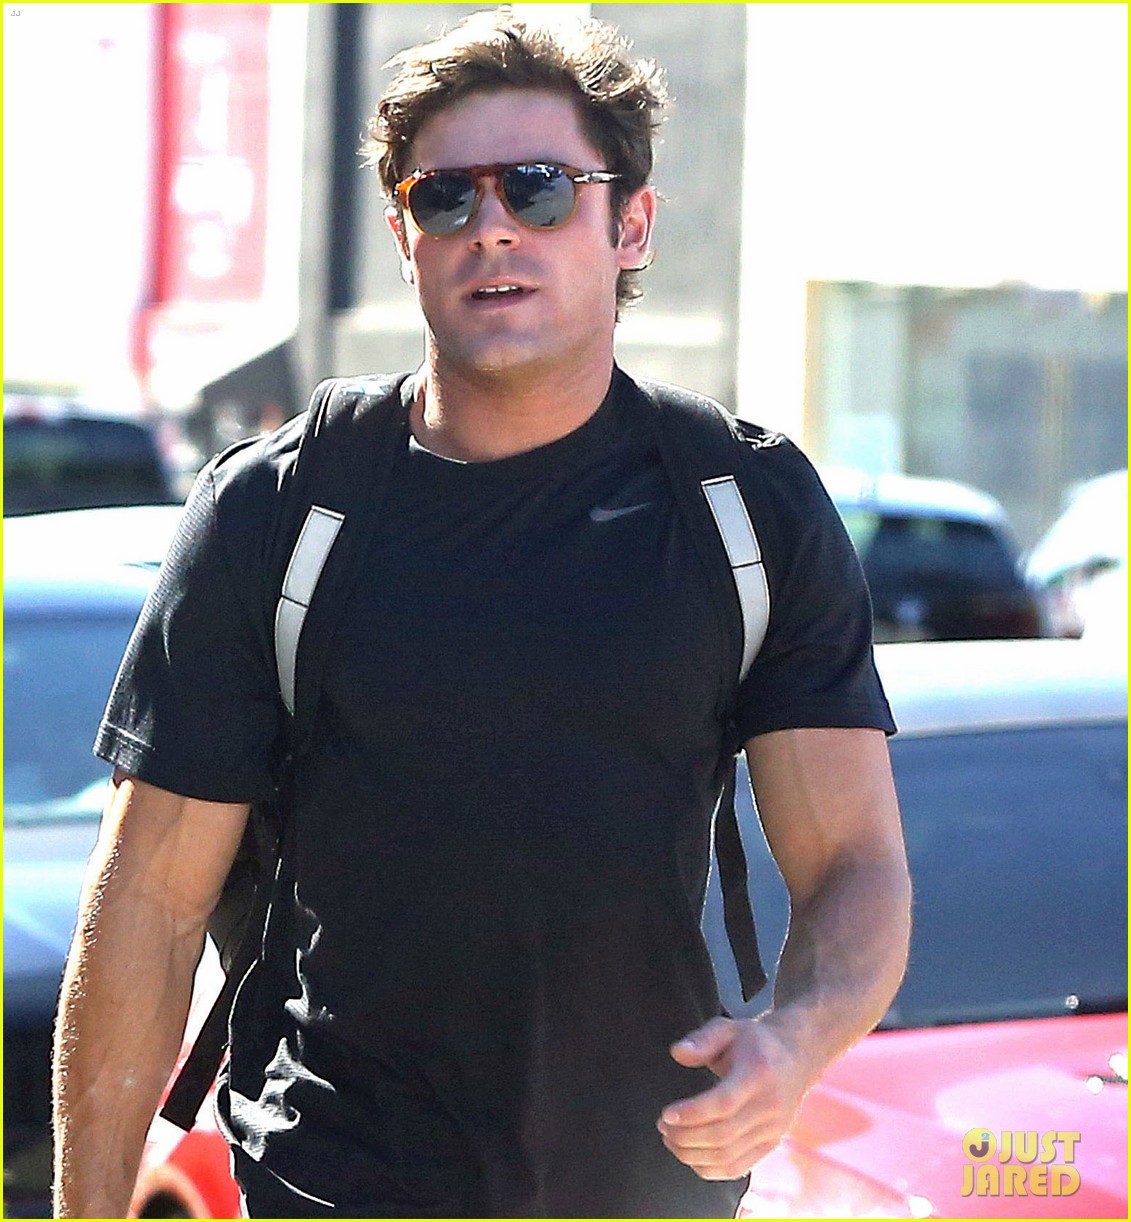 zac efron workout water los angeles 03